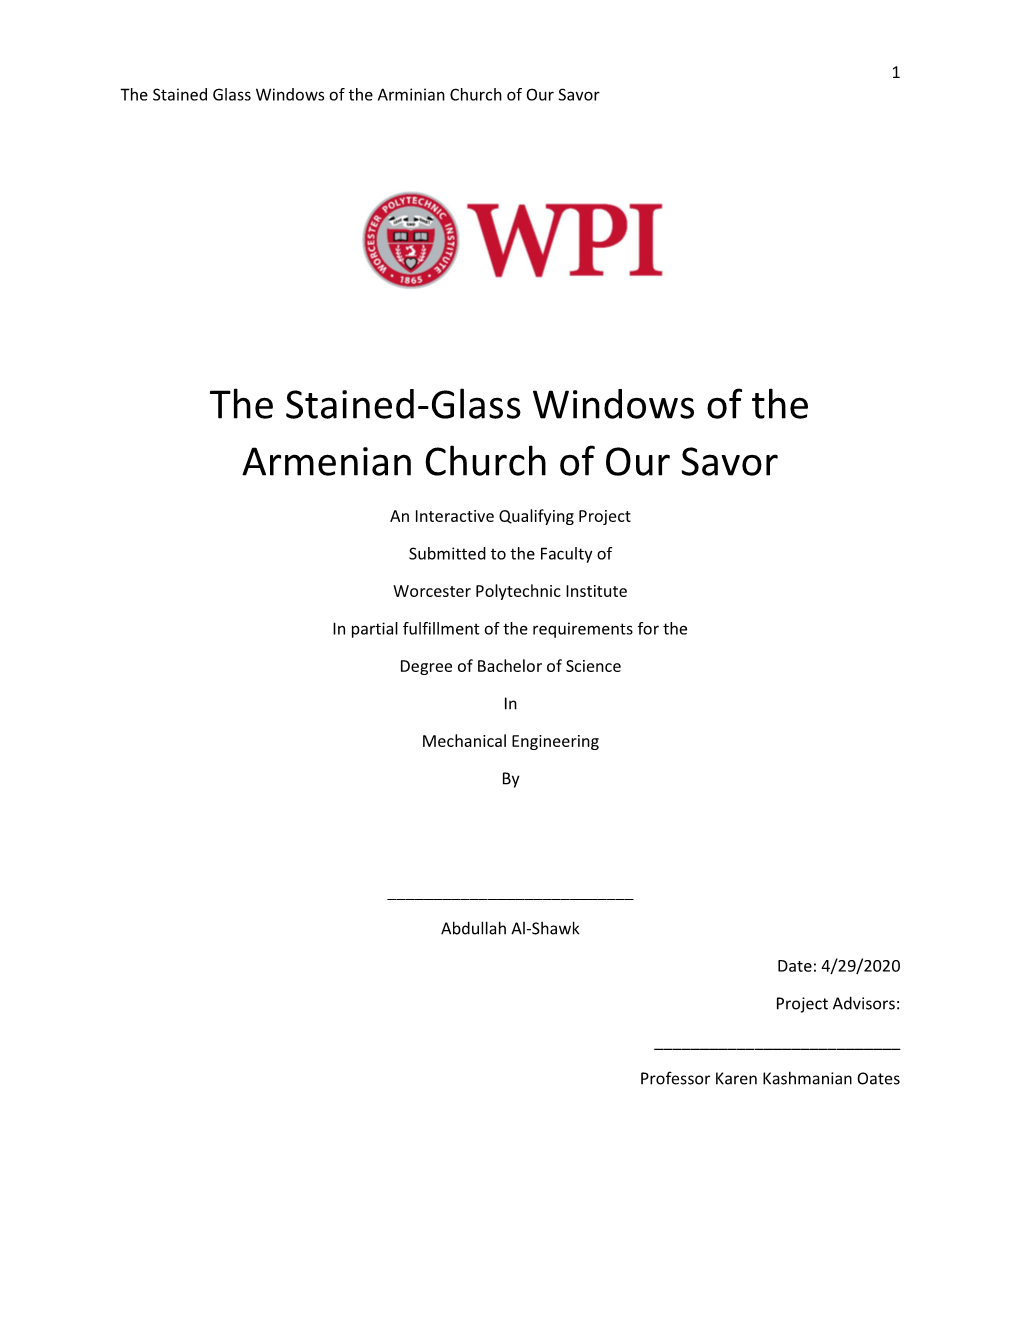 The Stained-Glass Windows of the Armenian Church of Our Savor